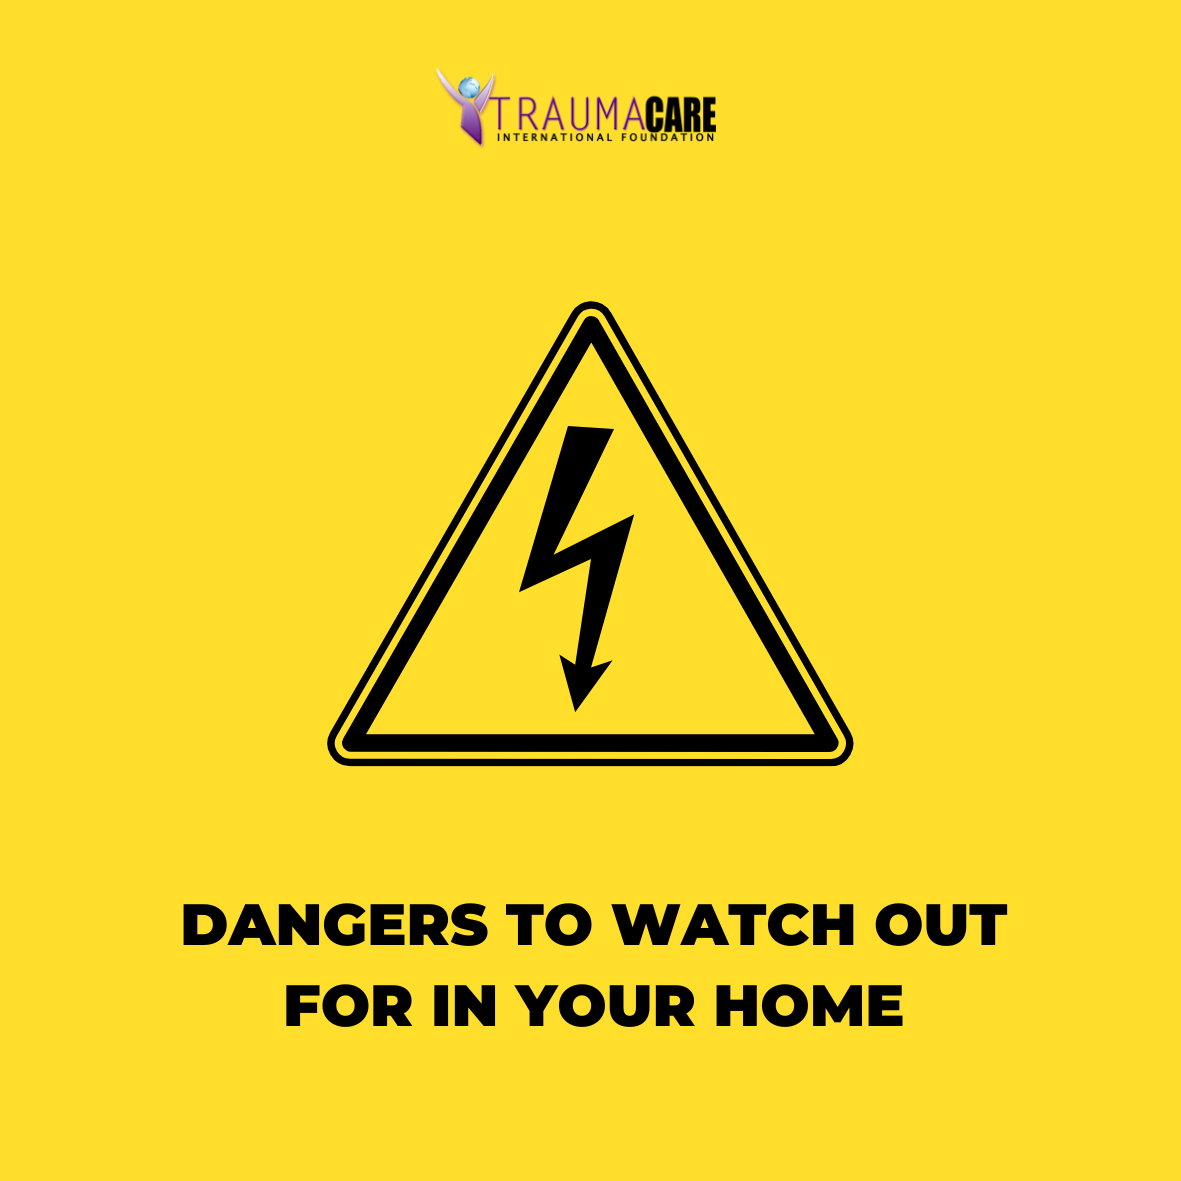 DANGERS TO WATCH OUT FOR IN YOUR HOME